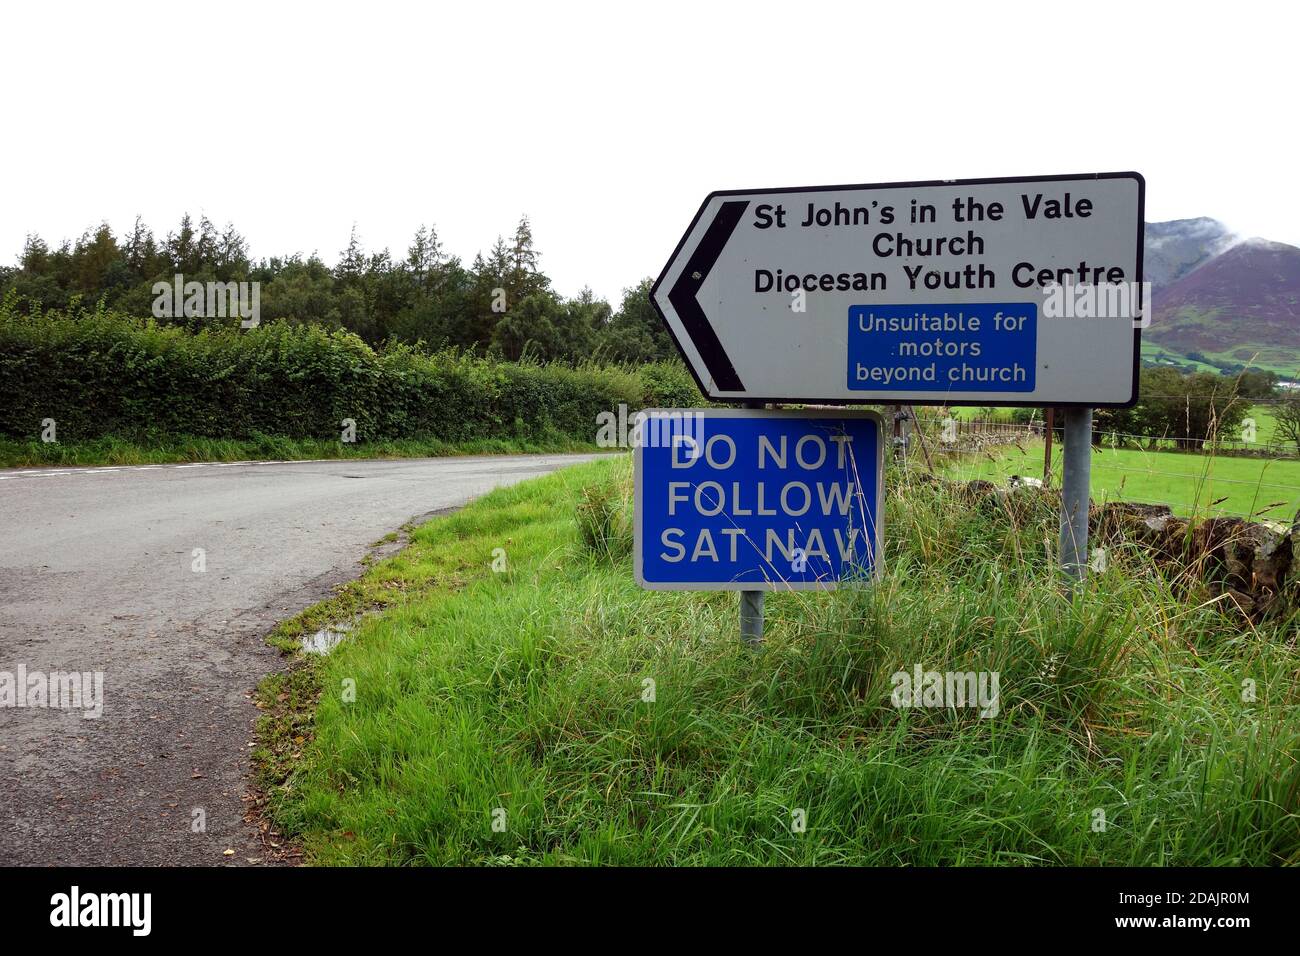 (DO NOT FOLLOW SAT NAV) on Metal Road Sign near B5322 for St John's in the Vale Church & Youth Centre in the Lake District National Park, Cumbria. Stock Photo